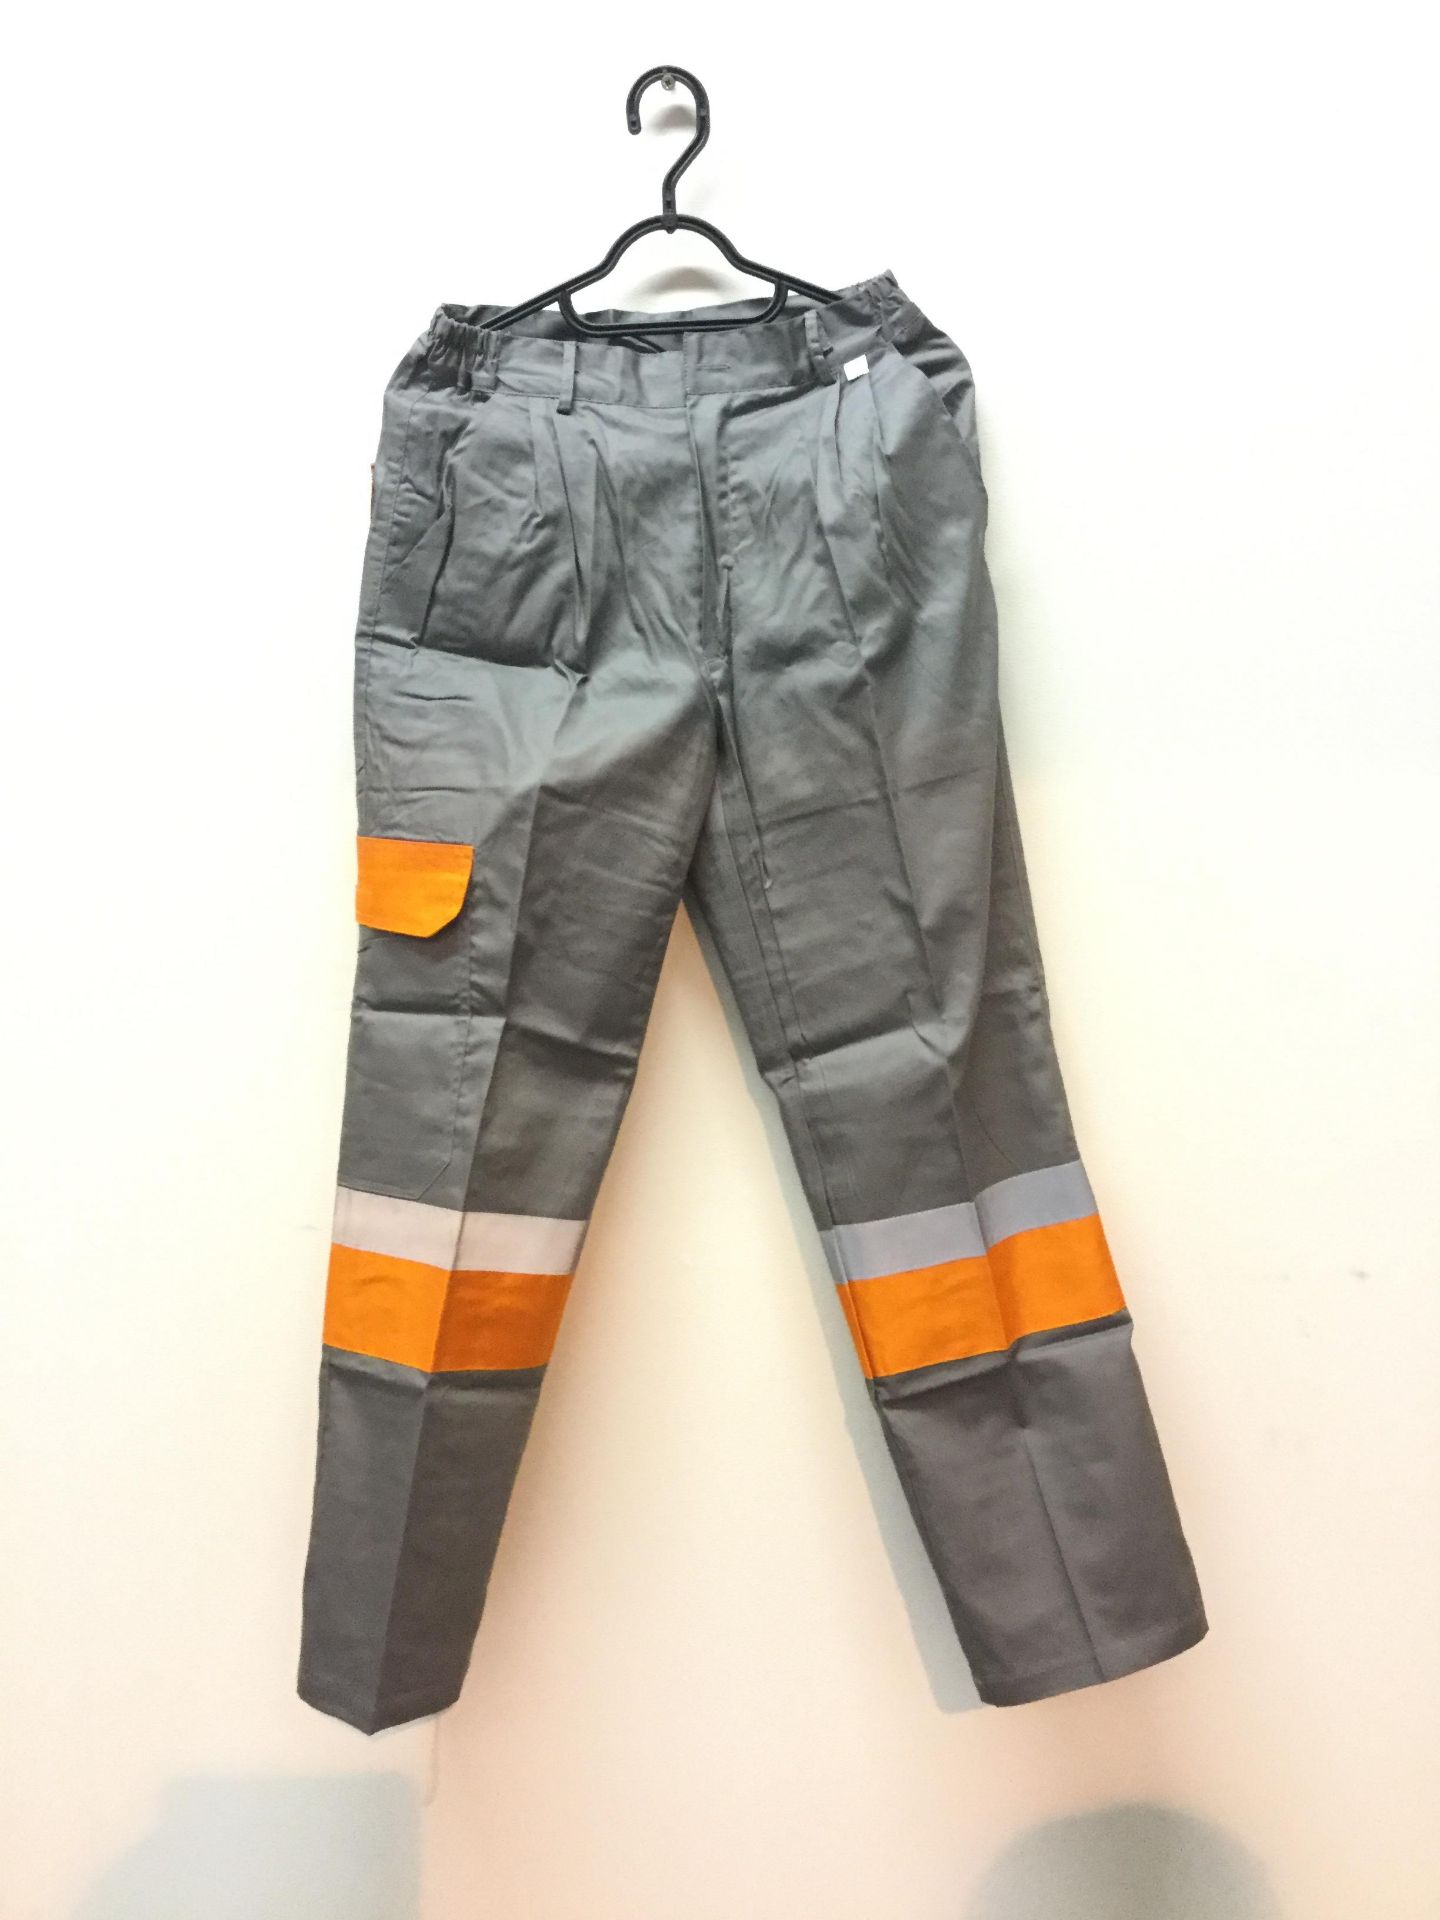 Flame Retardant Summer Trousers - Size 62